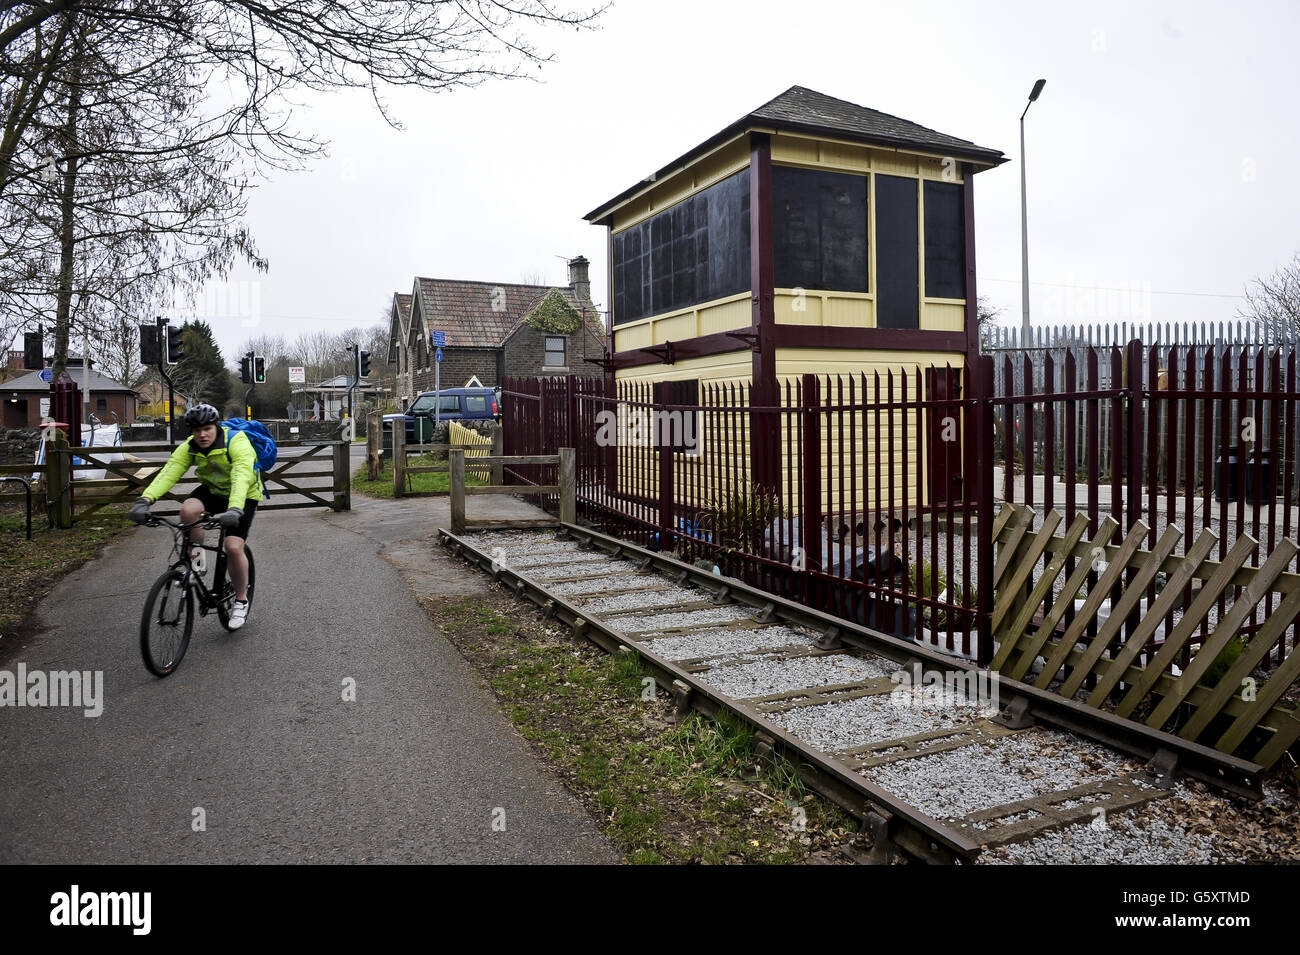 A cyclist passes the restored and preserved Warmly signal box on the Bristol & Bath railway path, Warmly. The Bristol & Bath Railway Path was constructed on the track bed of the former Midland Railway which closed for passenger traffic at the end of the 1960s. Between 1979 and 1986, the railway line was converted into the Railway Path by cycling charity Sustrans. The first stretch was between Bath and Bitton where the campaign group, Cyclebag obtained planning permission to create the 2m wide dust track. The route then developed westwards with Bristol being the last section. This was tarmaced Stock Photo